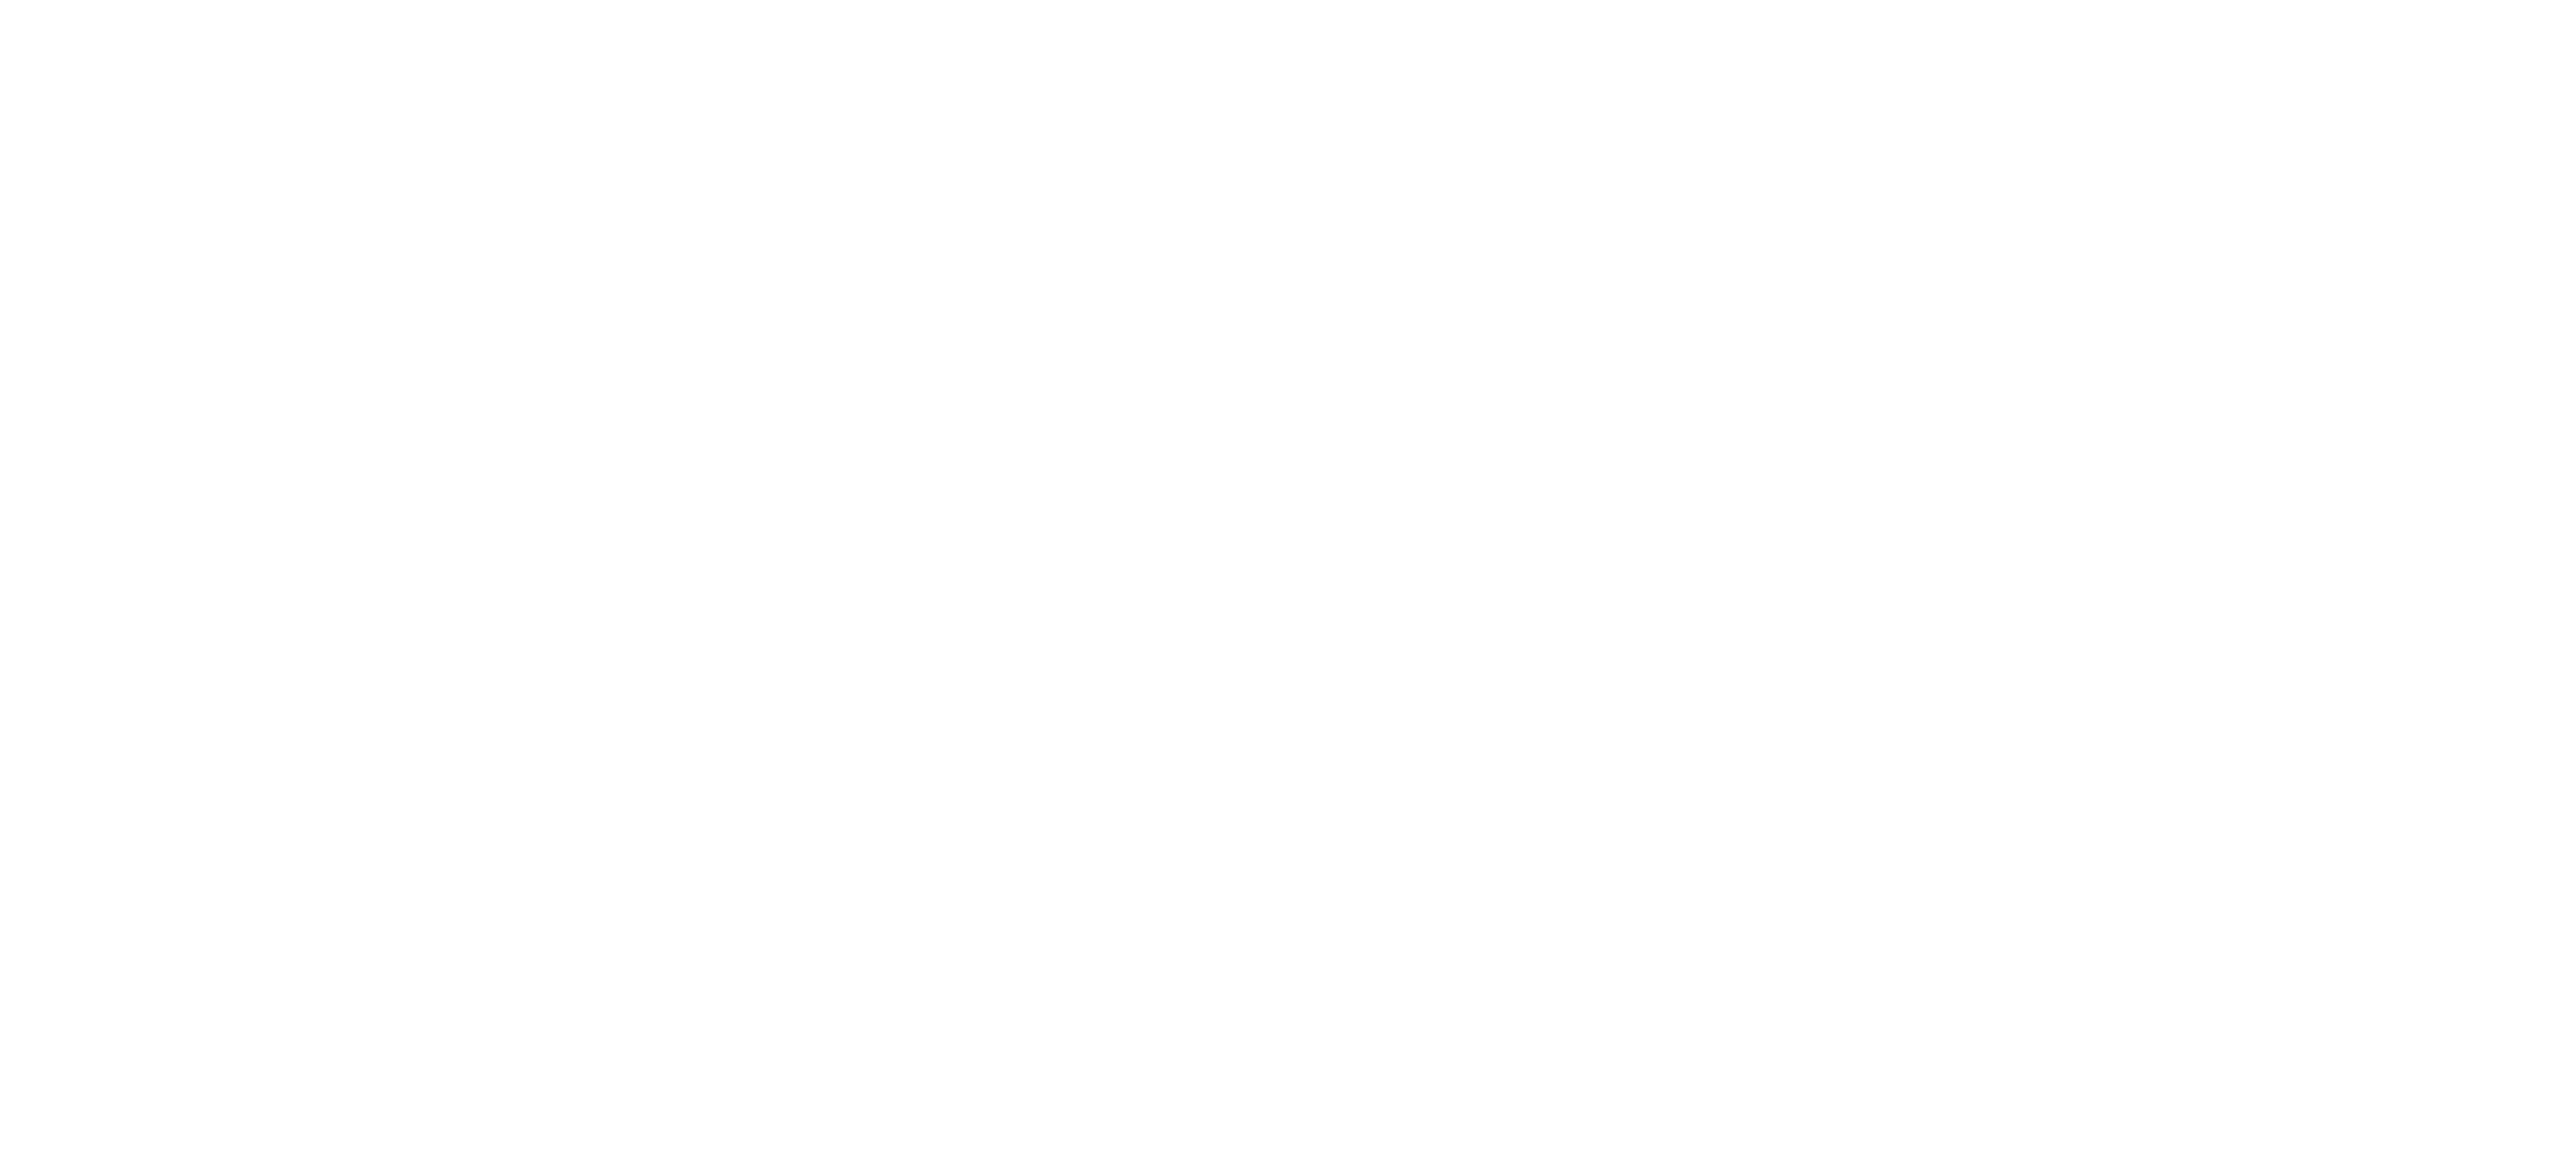 Consulting Business Center